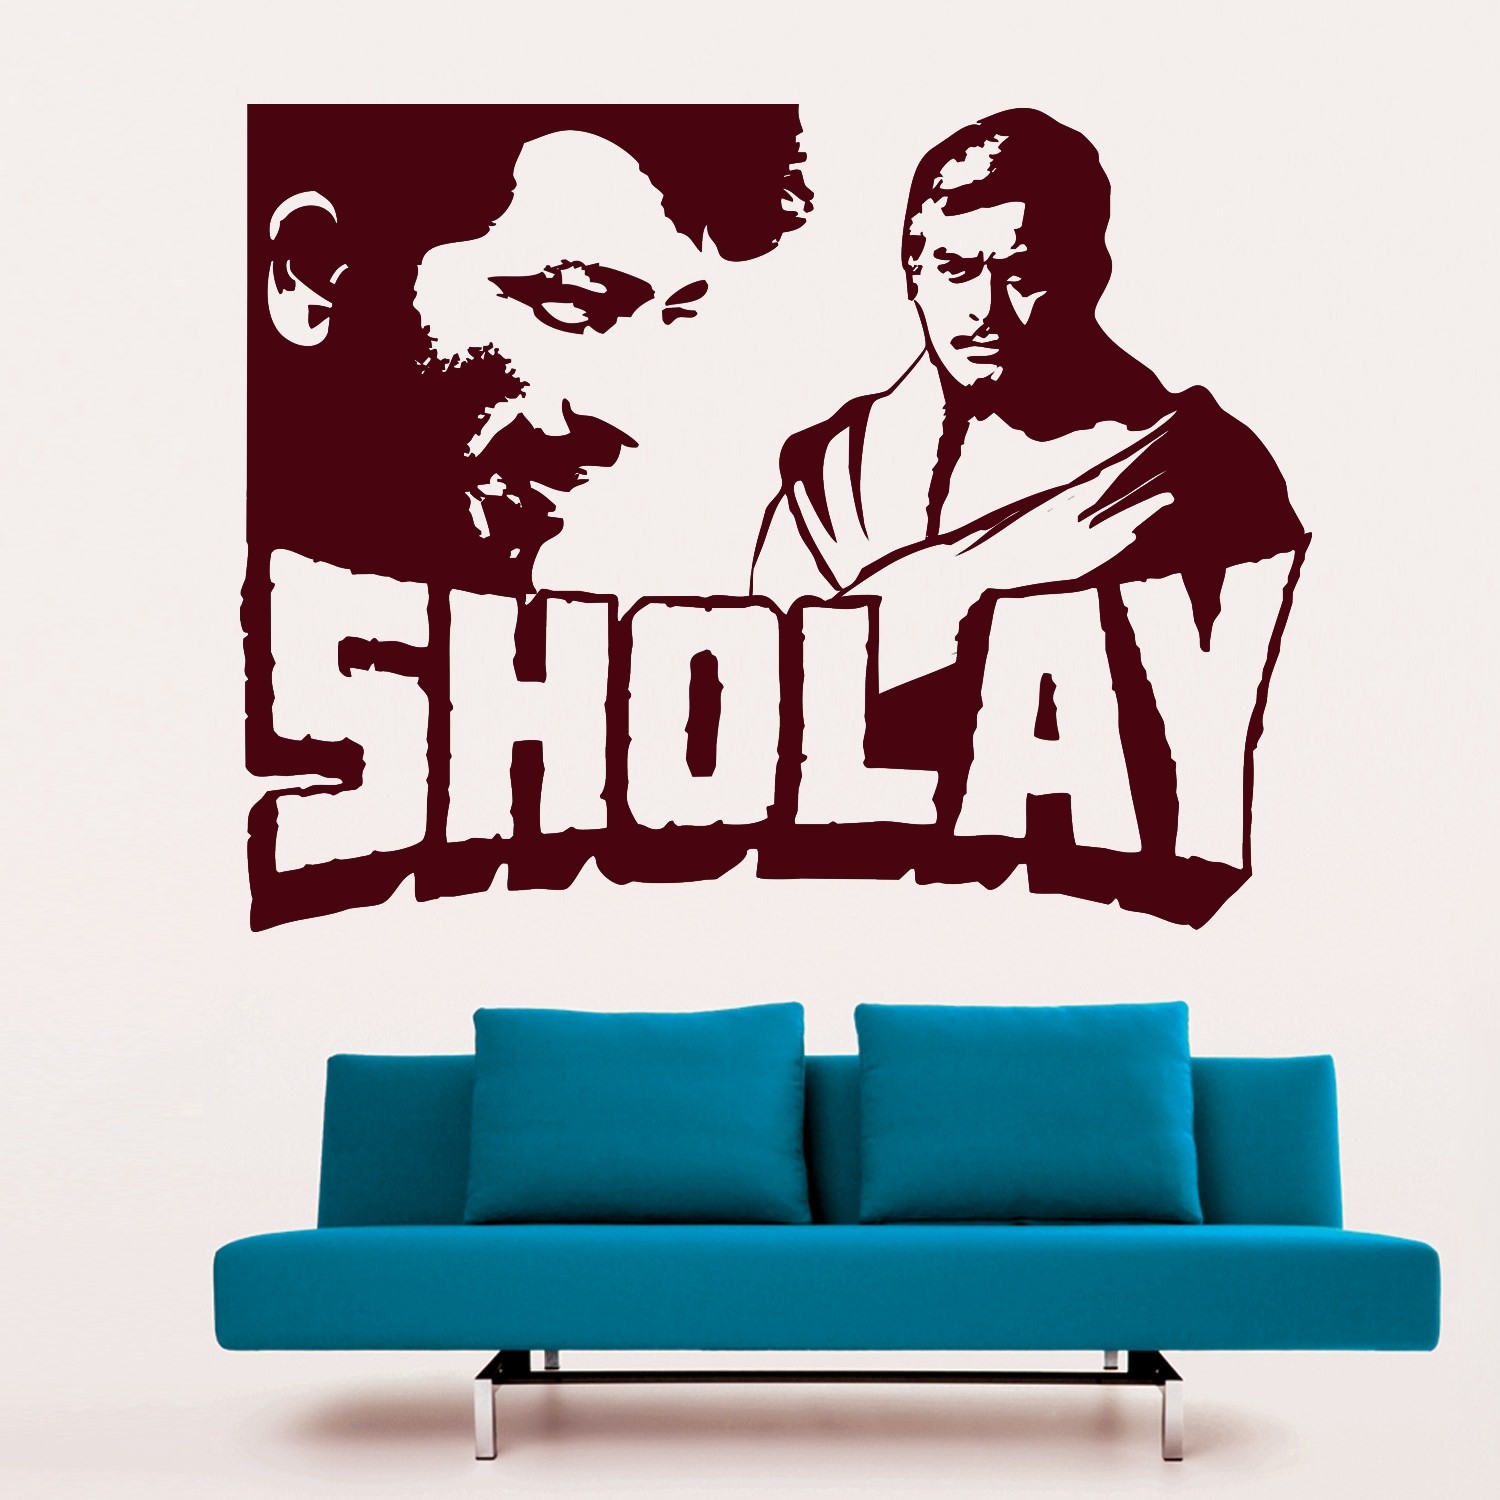 Sholay Wall Sticker Decal-Small-Burgundy